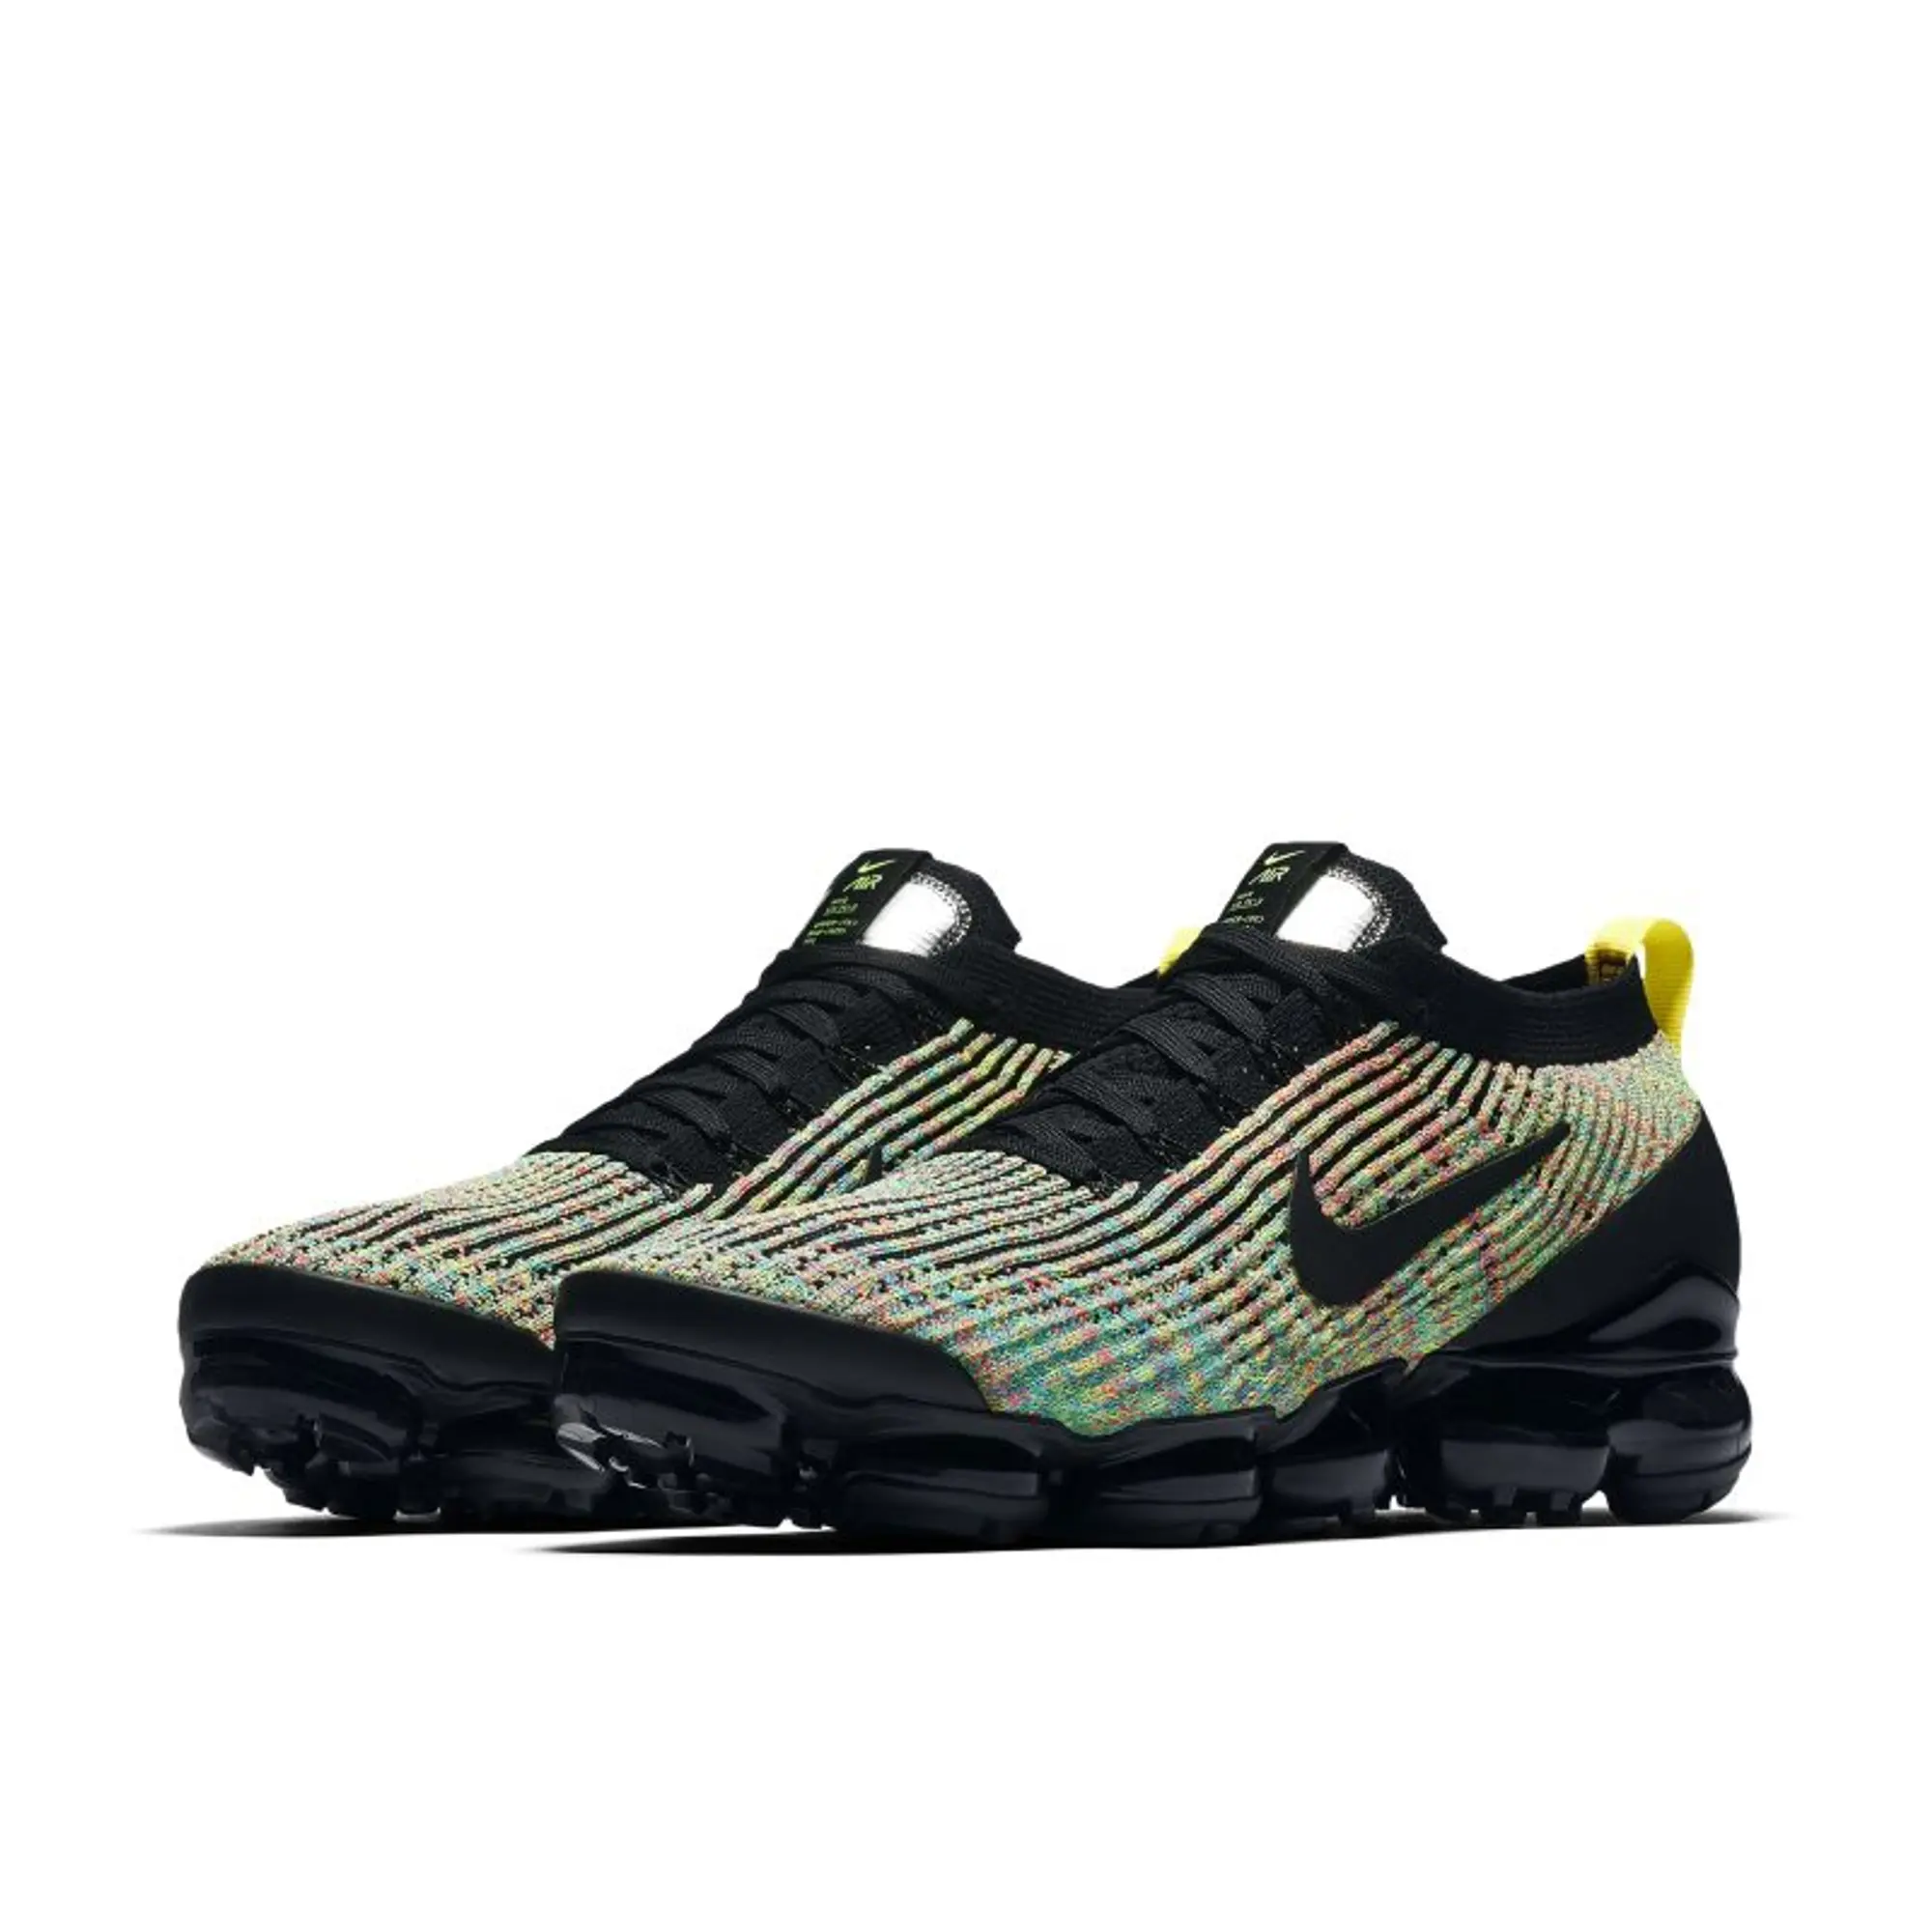 Nike Air Vapormax Flyknit 3 Multi-Color Shoes